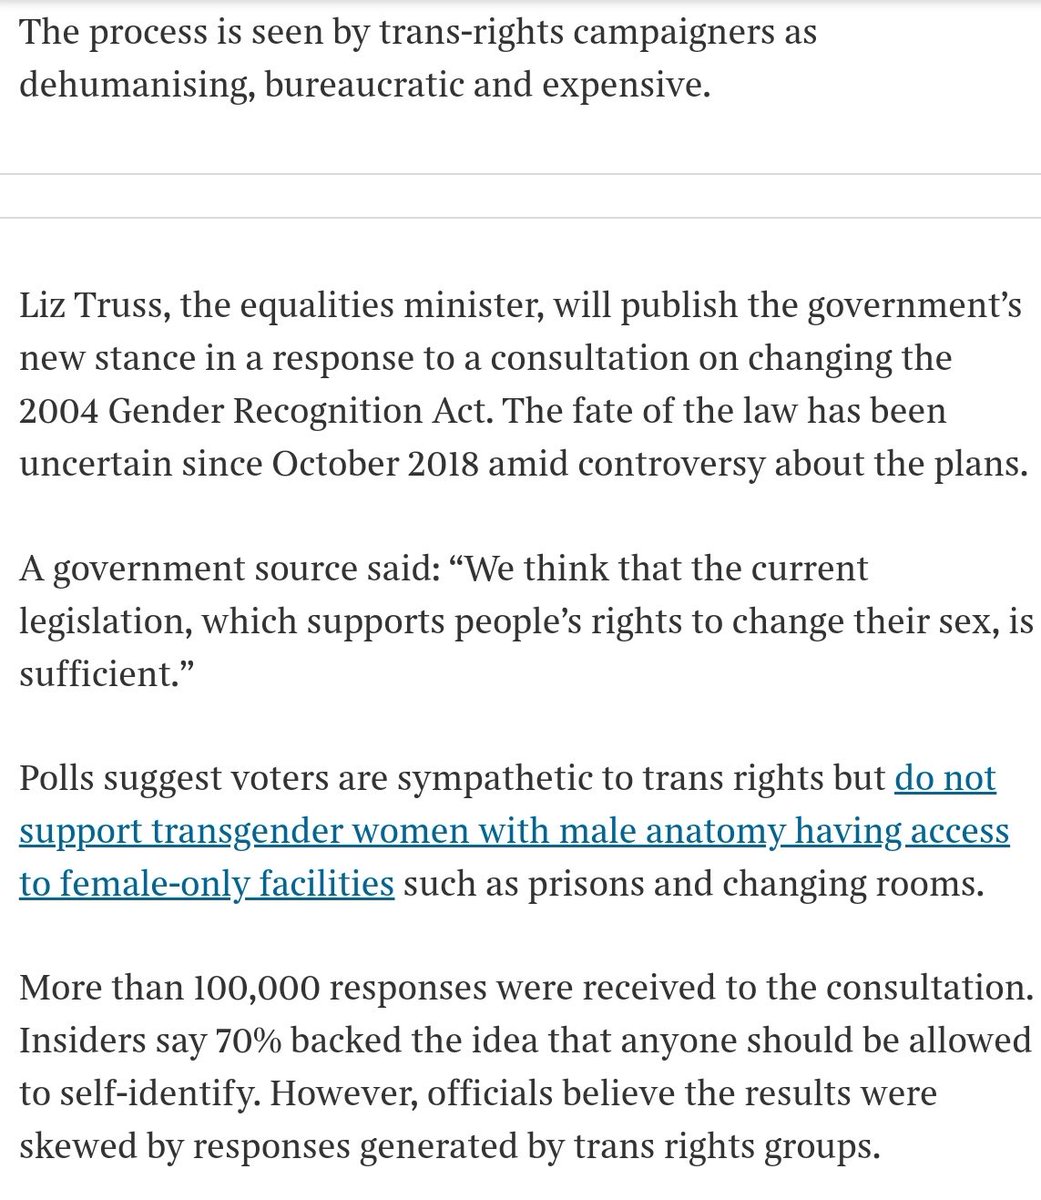 The article reiterates the frame that ppl are against trans access to single sex space (SSS) (irrelevant to the GRA). It is exactly here that Gender Critics (GC), wider transphobes, far right and our govt meet: creating a moral panic in order to destroy the Equality Act (EA) /2